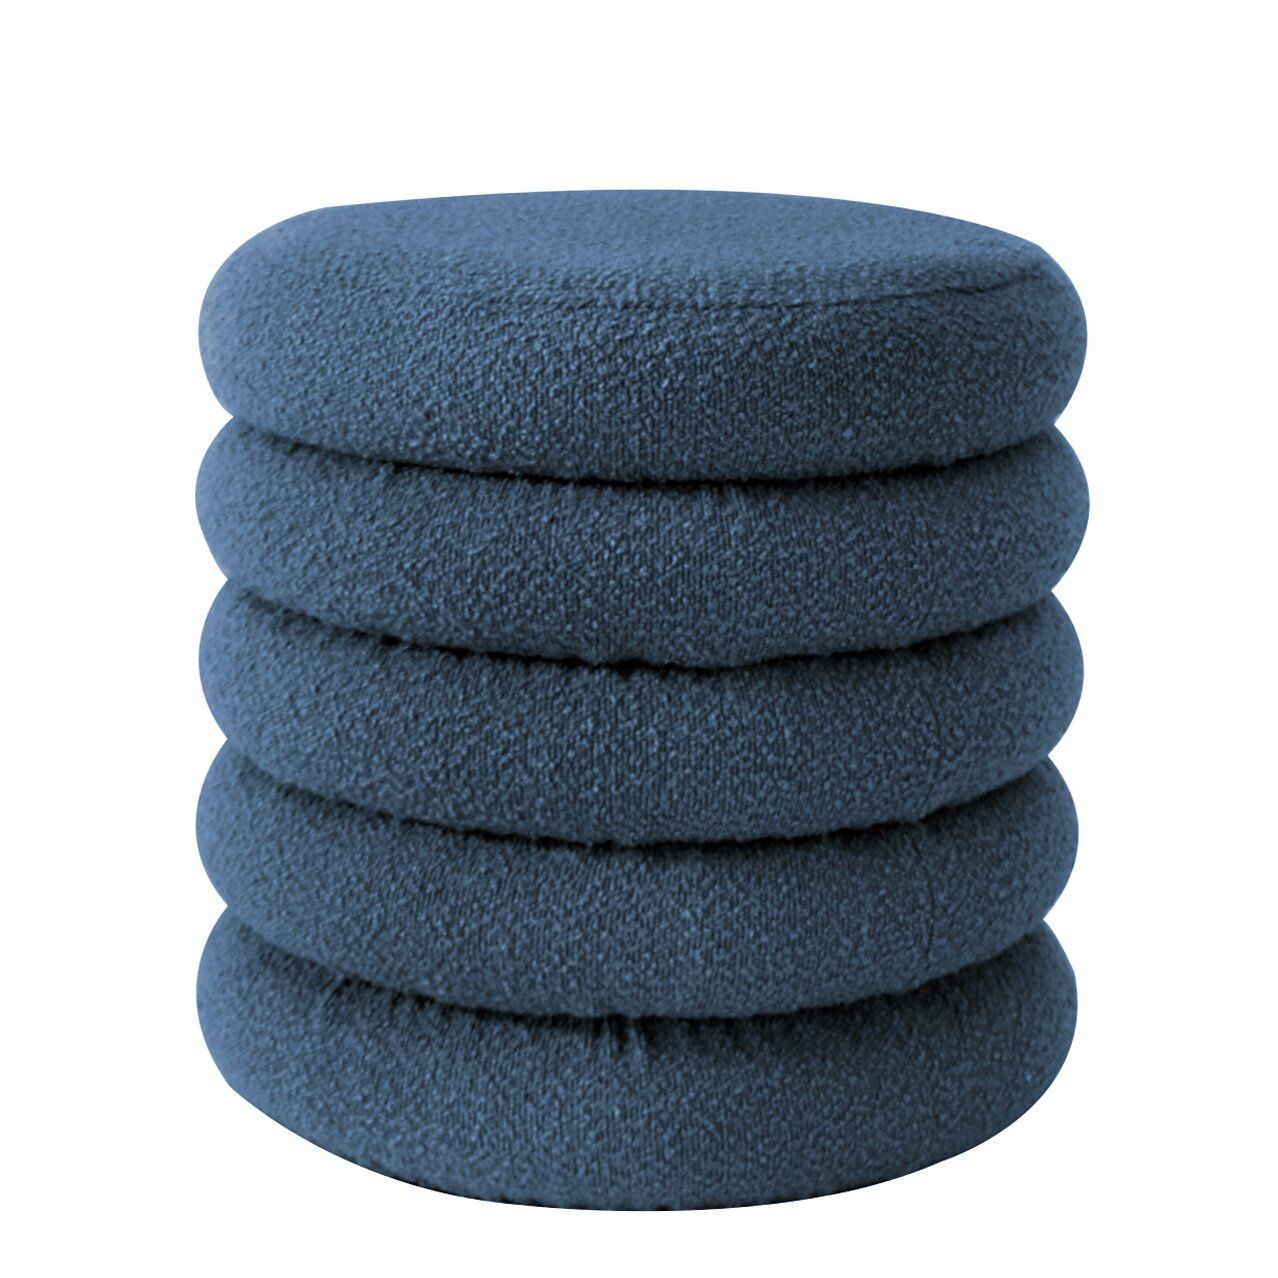 CAMBRIA Pouf With Storage Space Blue Boucle Fabric 44x44x44cm